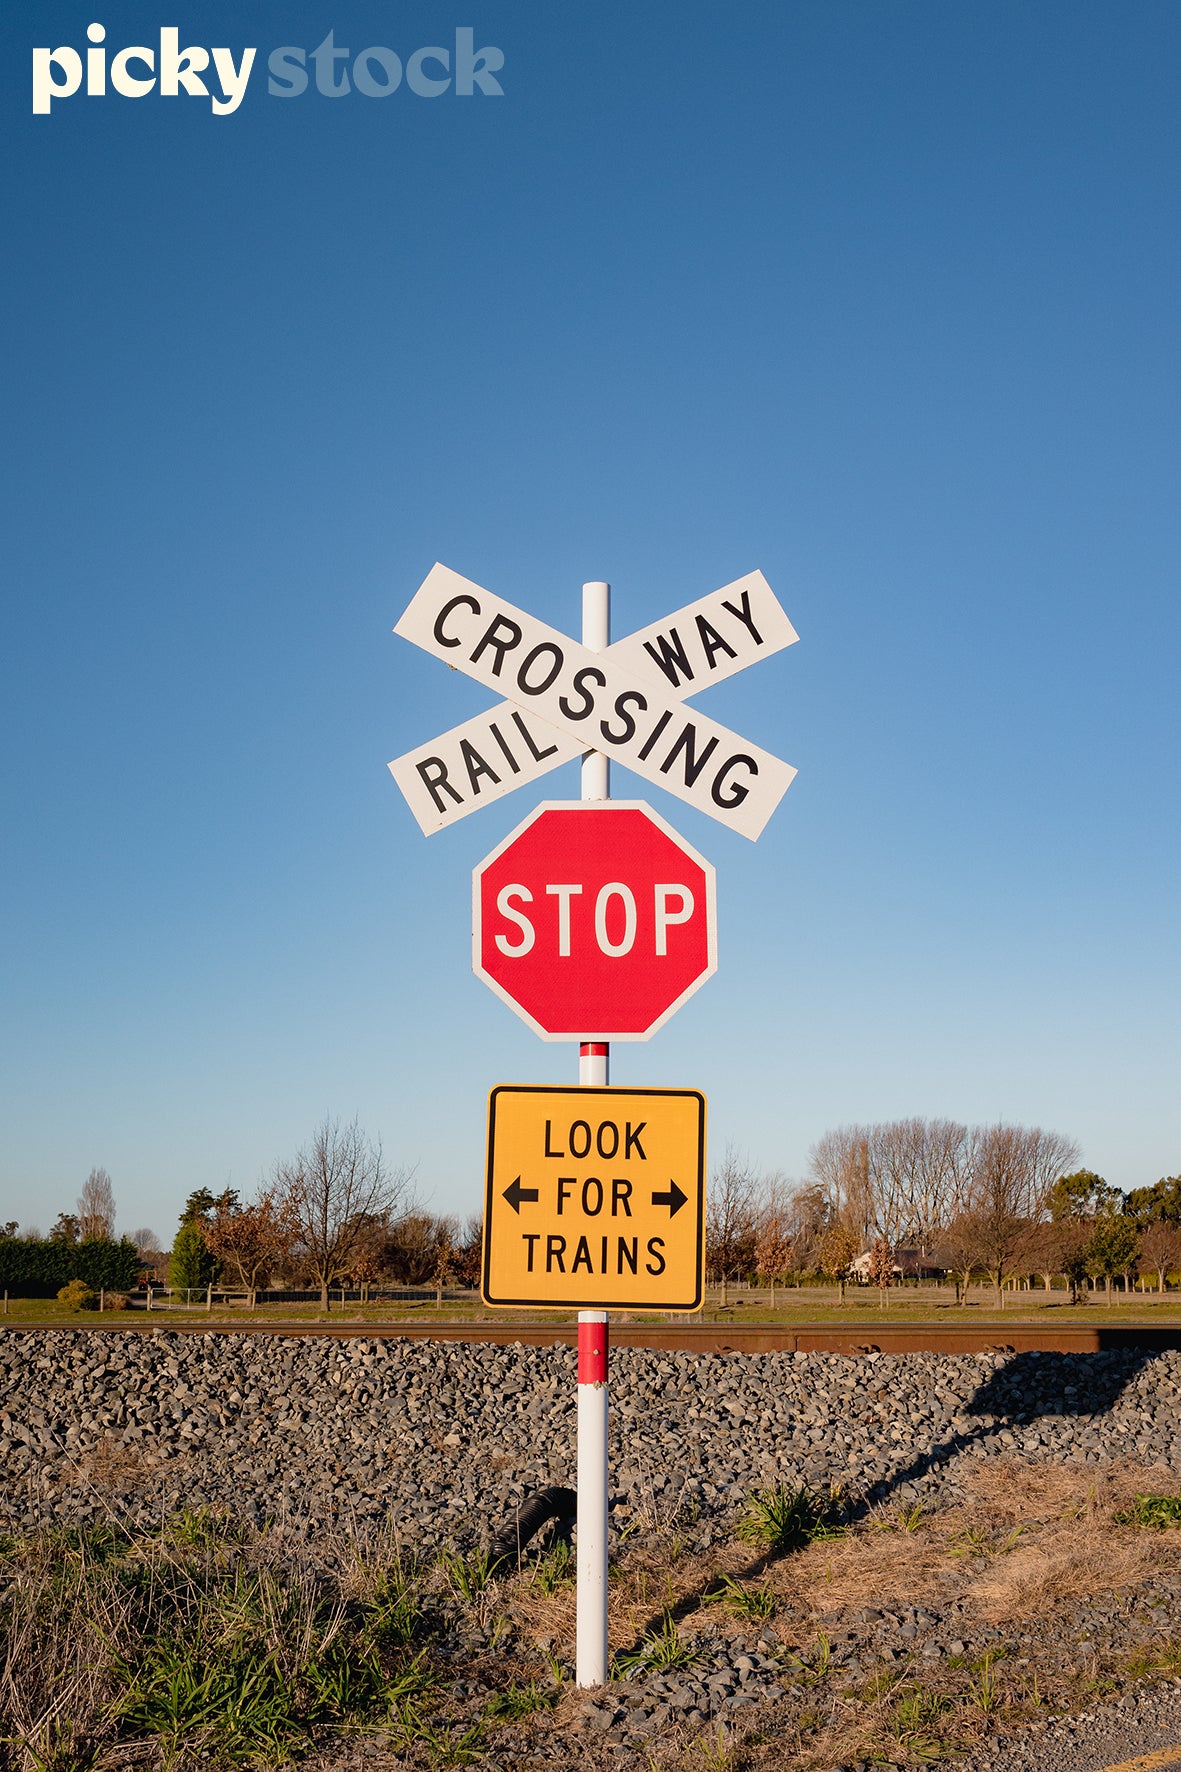 Railway crossing sign, on side of a road. Sky is blue. Stop sign, and 'Look for Train' sign in yellow also attached to crossing pole. Brown rail track in background, with gravel road around.